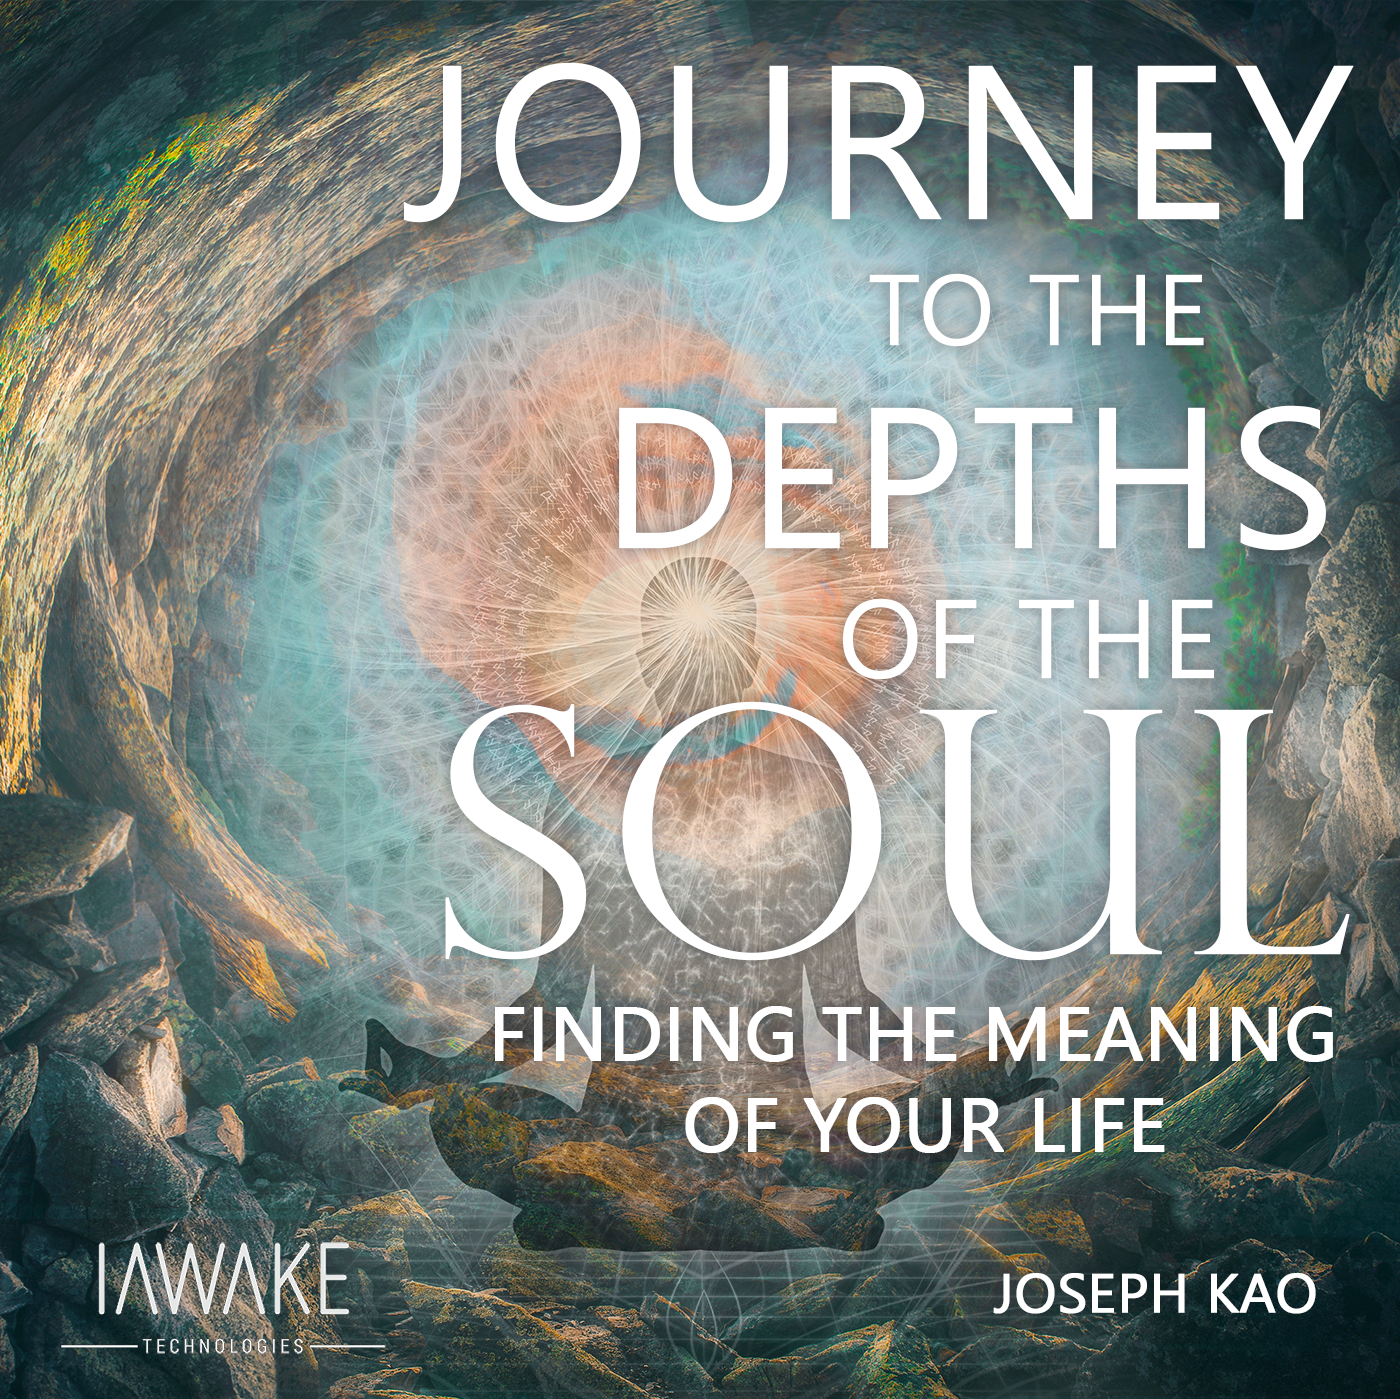 Journey to the Depths of the Soul - iAwake Technologies